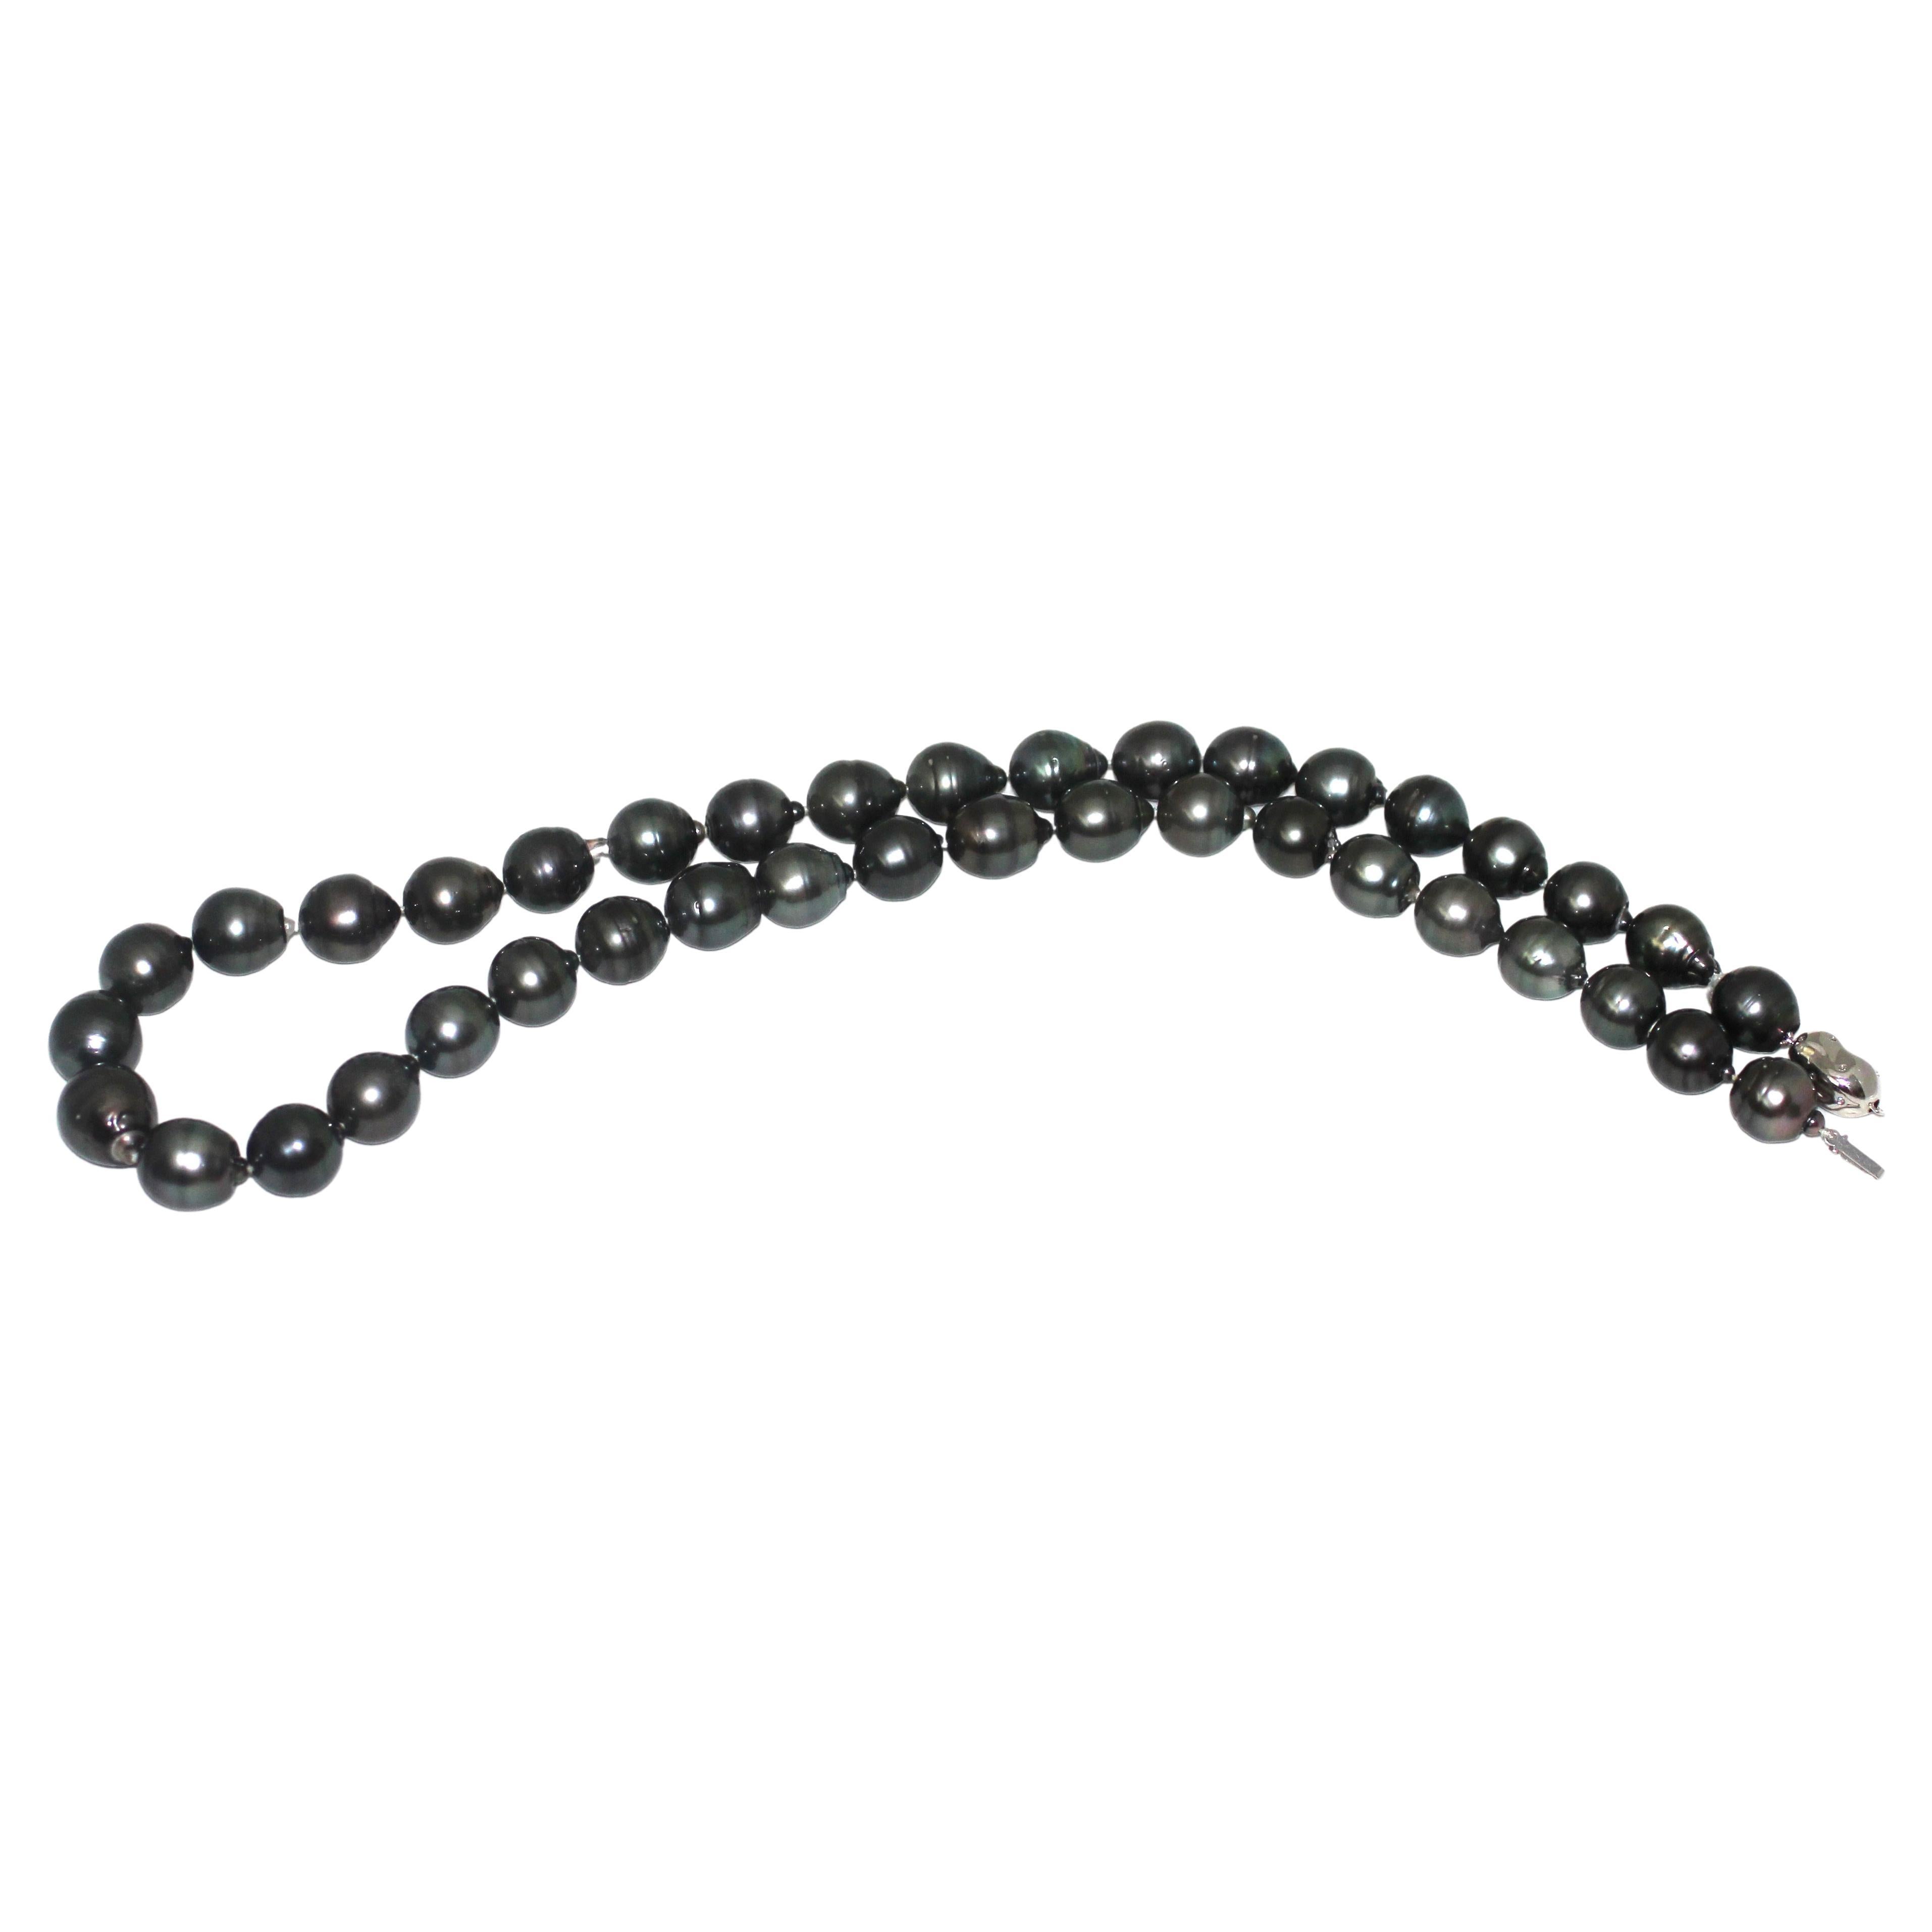 Hakimoto By Jewel Of Ocean
Manufacture Suggested Retail Price $25,000
Tahitian South Sea Baroque Pearl Necklace
18K Diamond White Gold Clasp
39 Tahitian Baroque Pearls Size 15.5x17.5mm
30